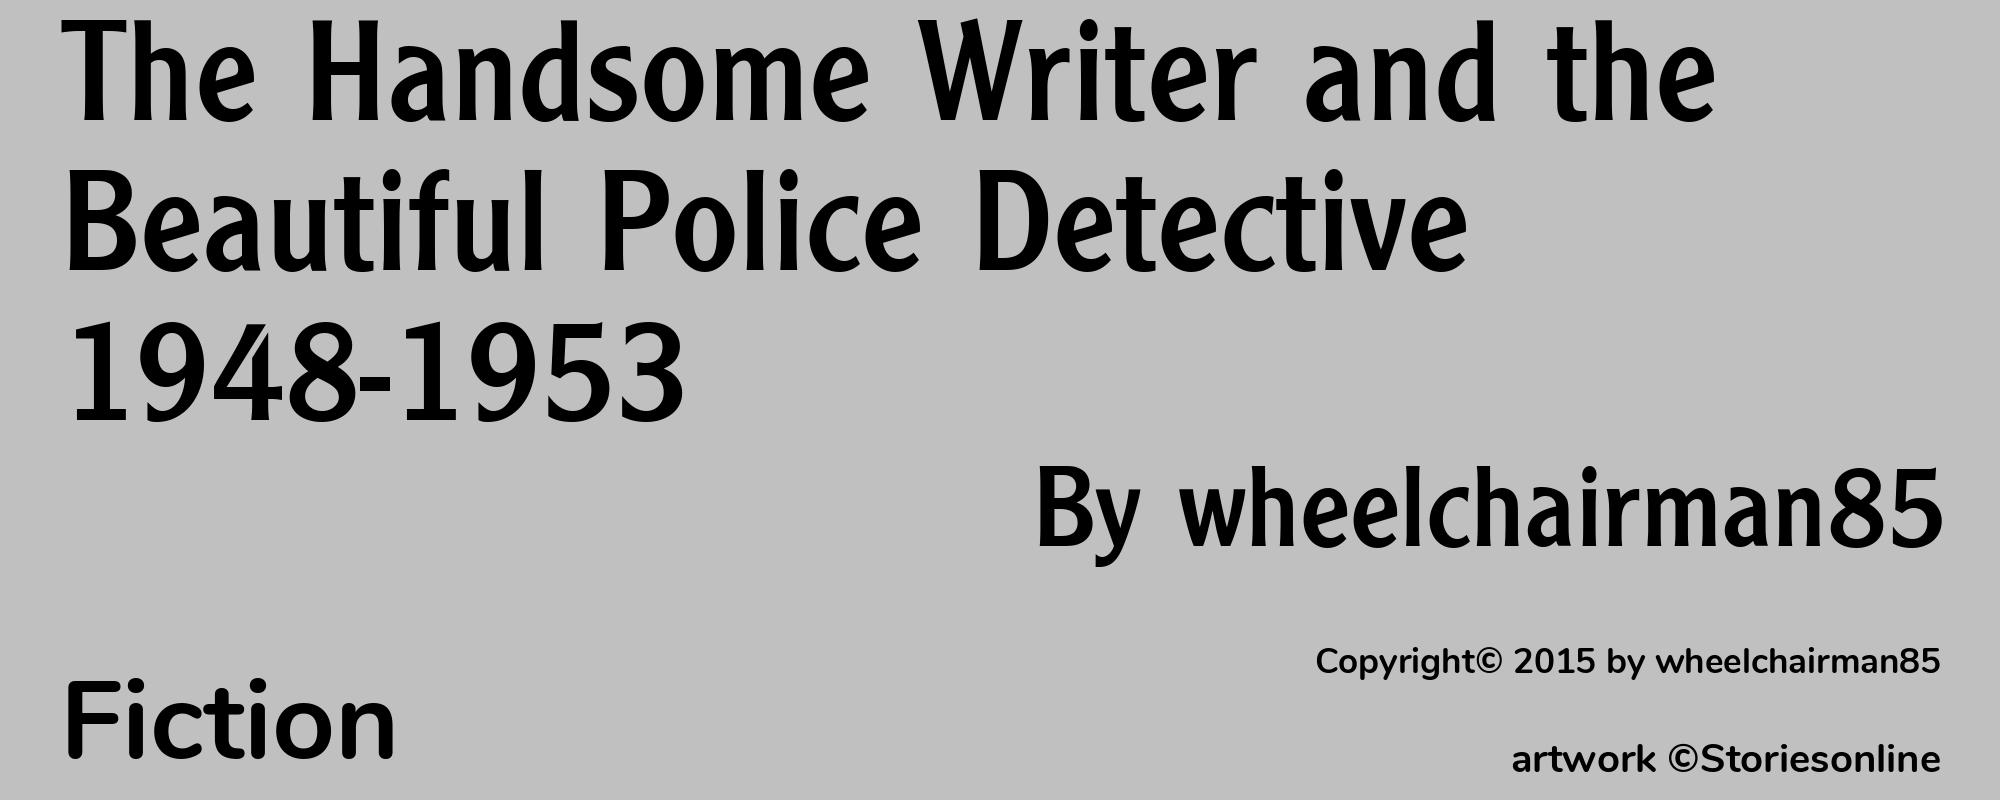 The Handsome Writer and the Beautiful Police Detective 1948-1953 - Cover